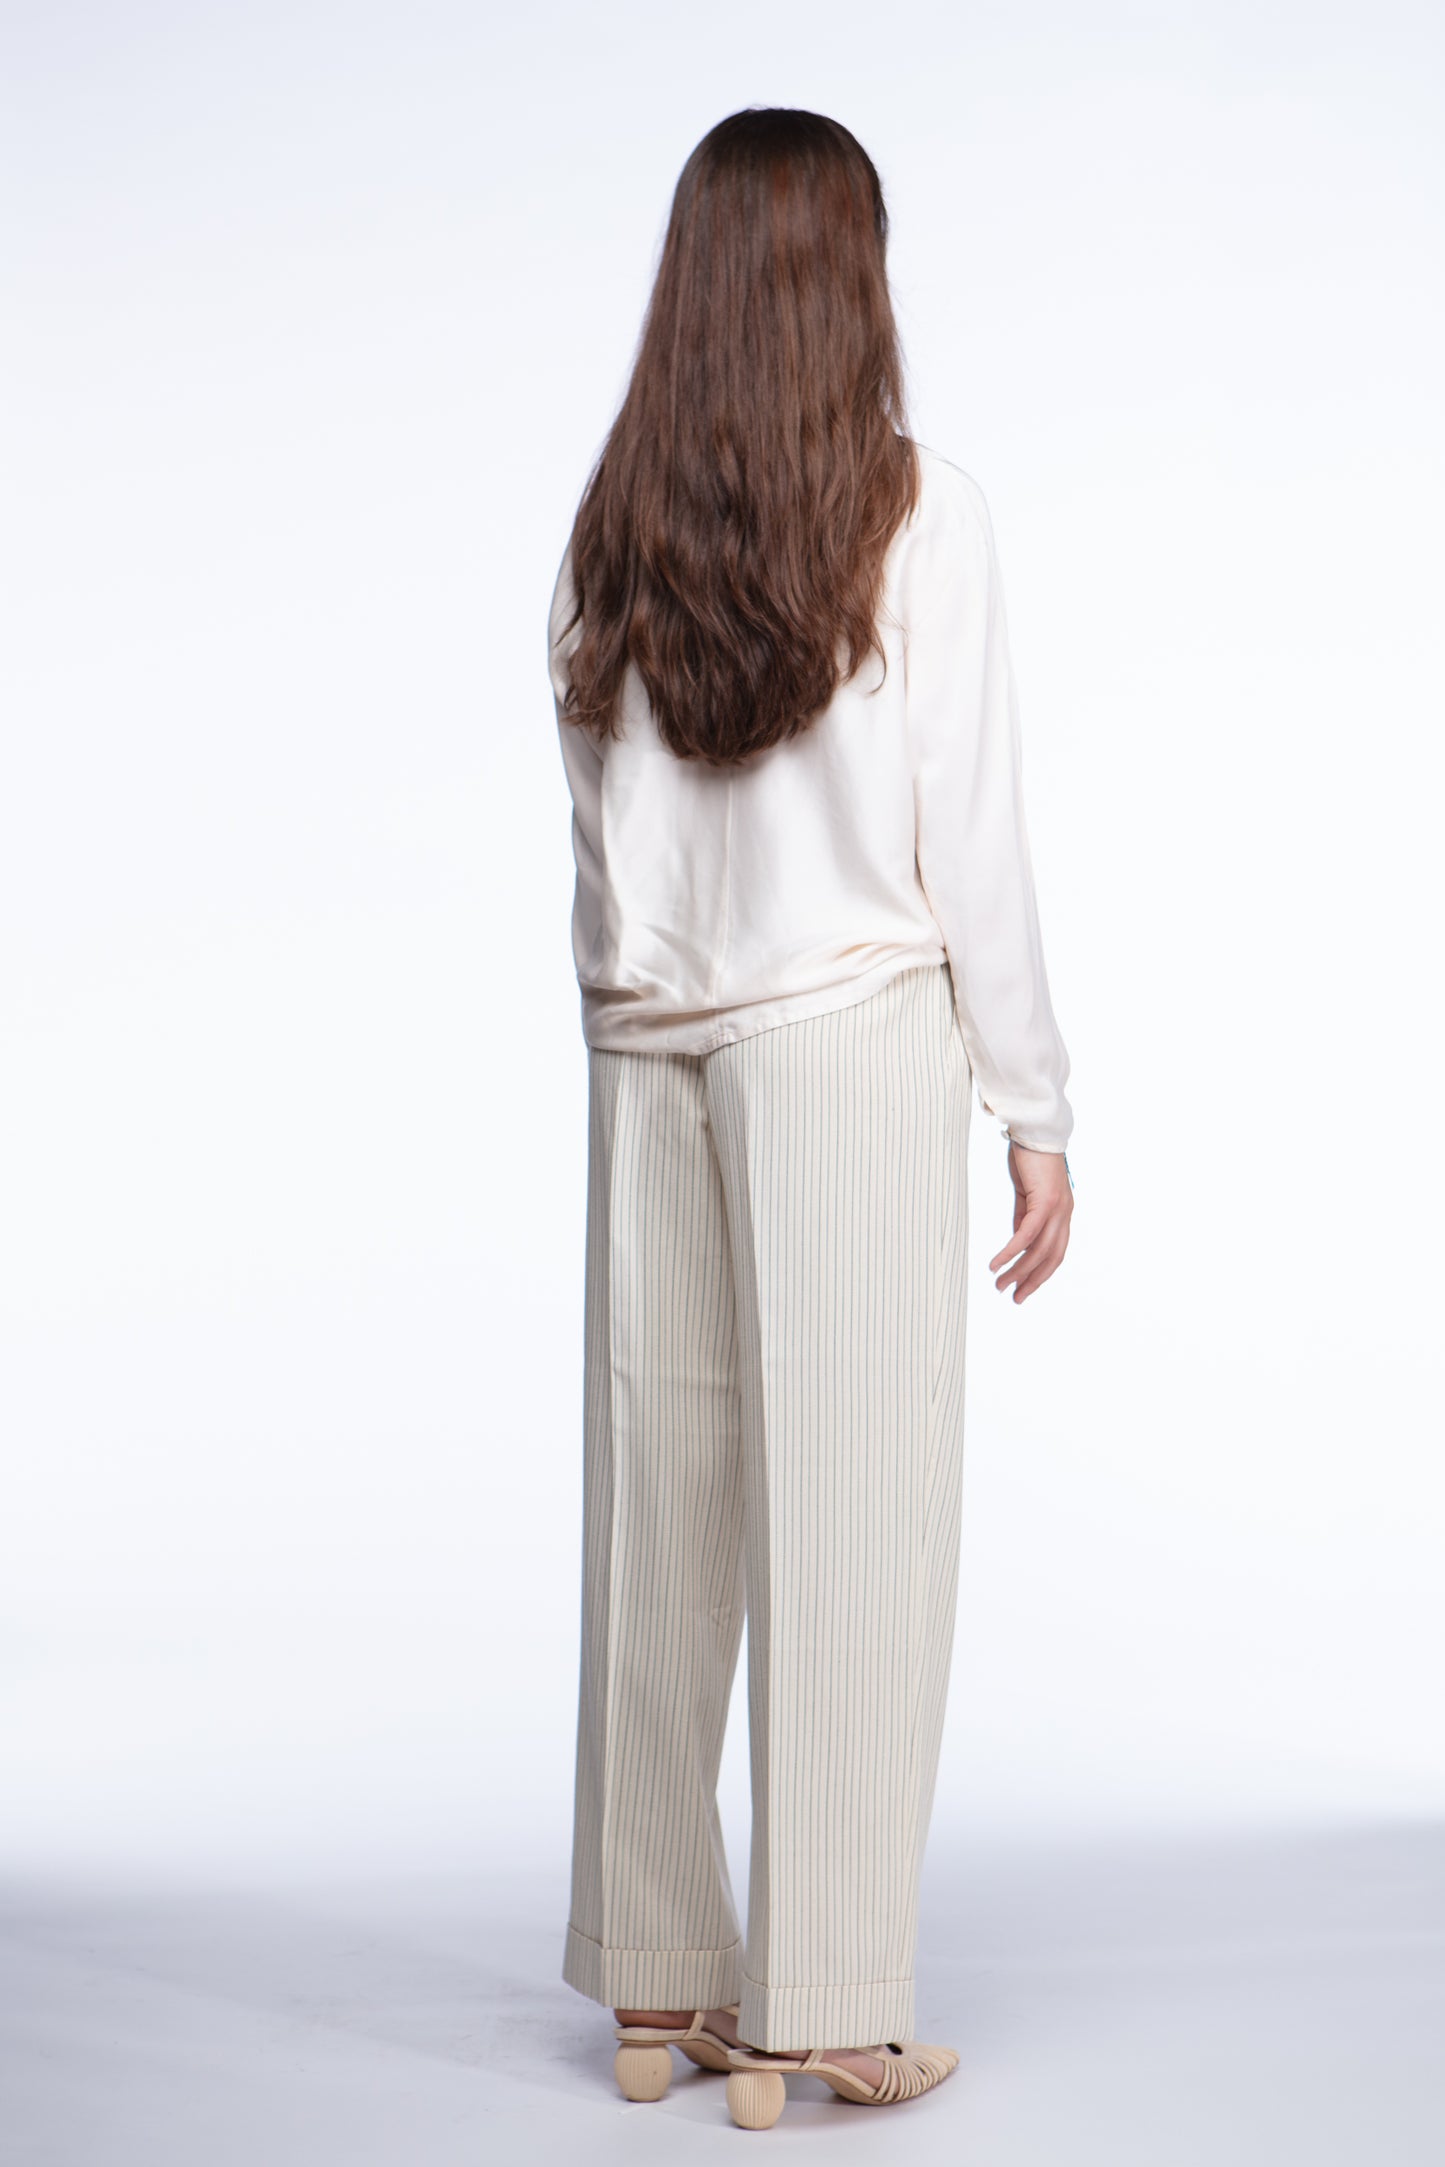 Valentino pleated pinstripe trouser pants